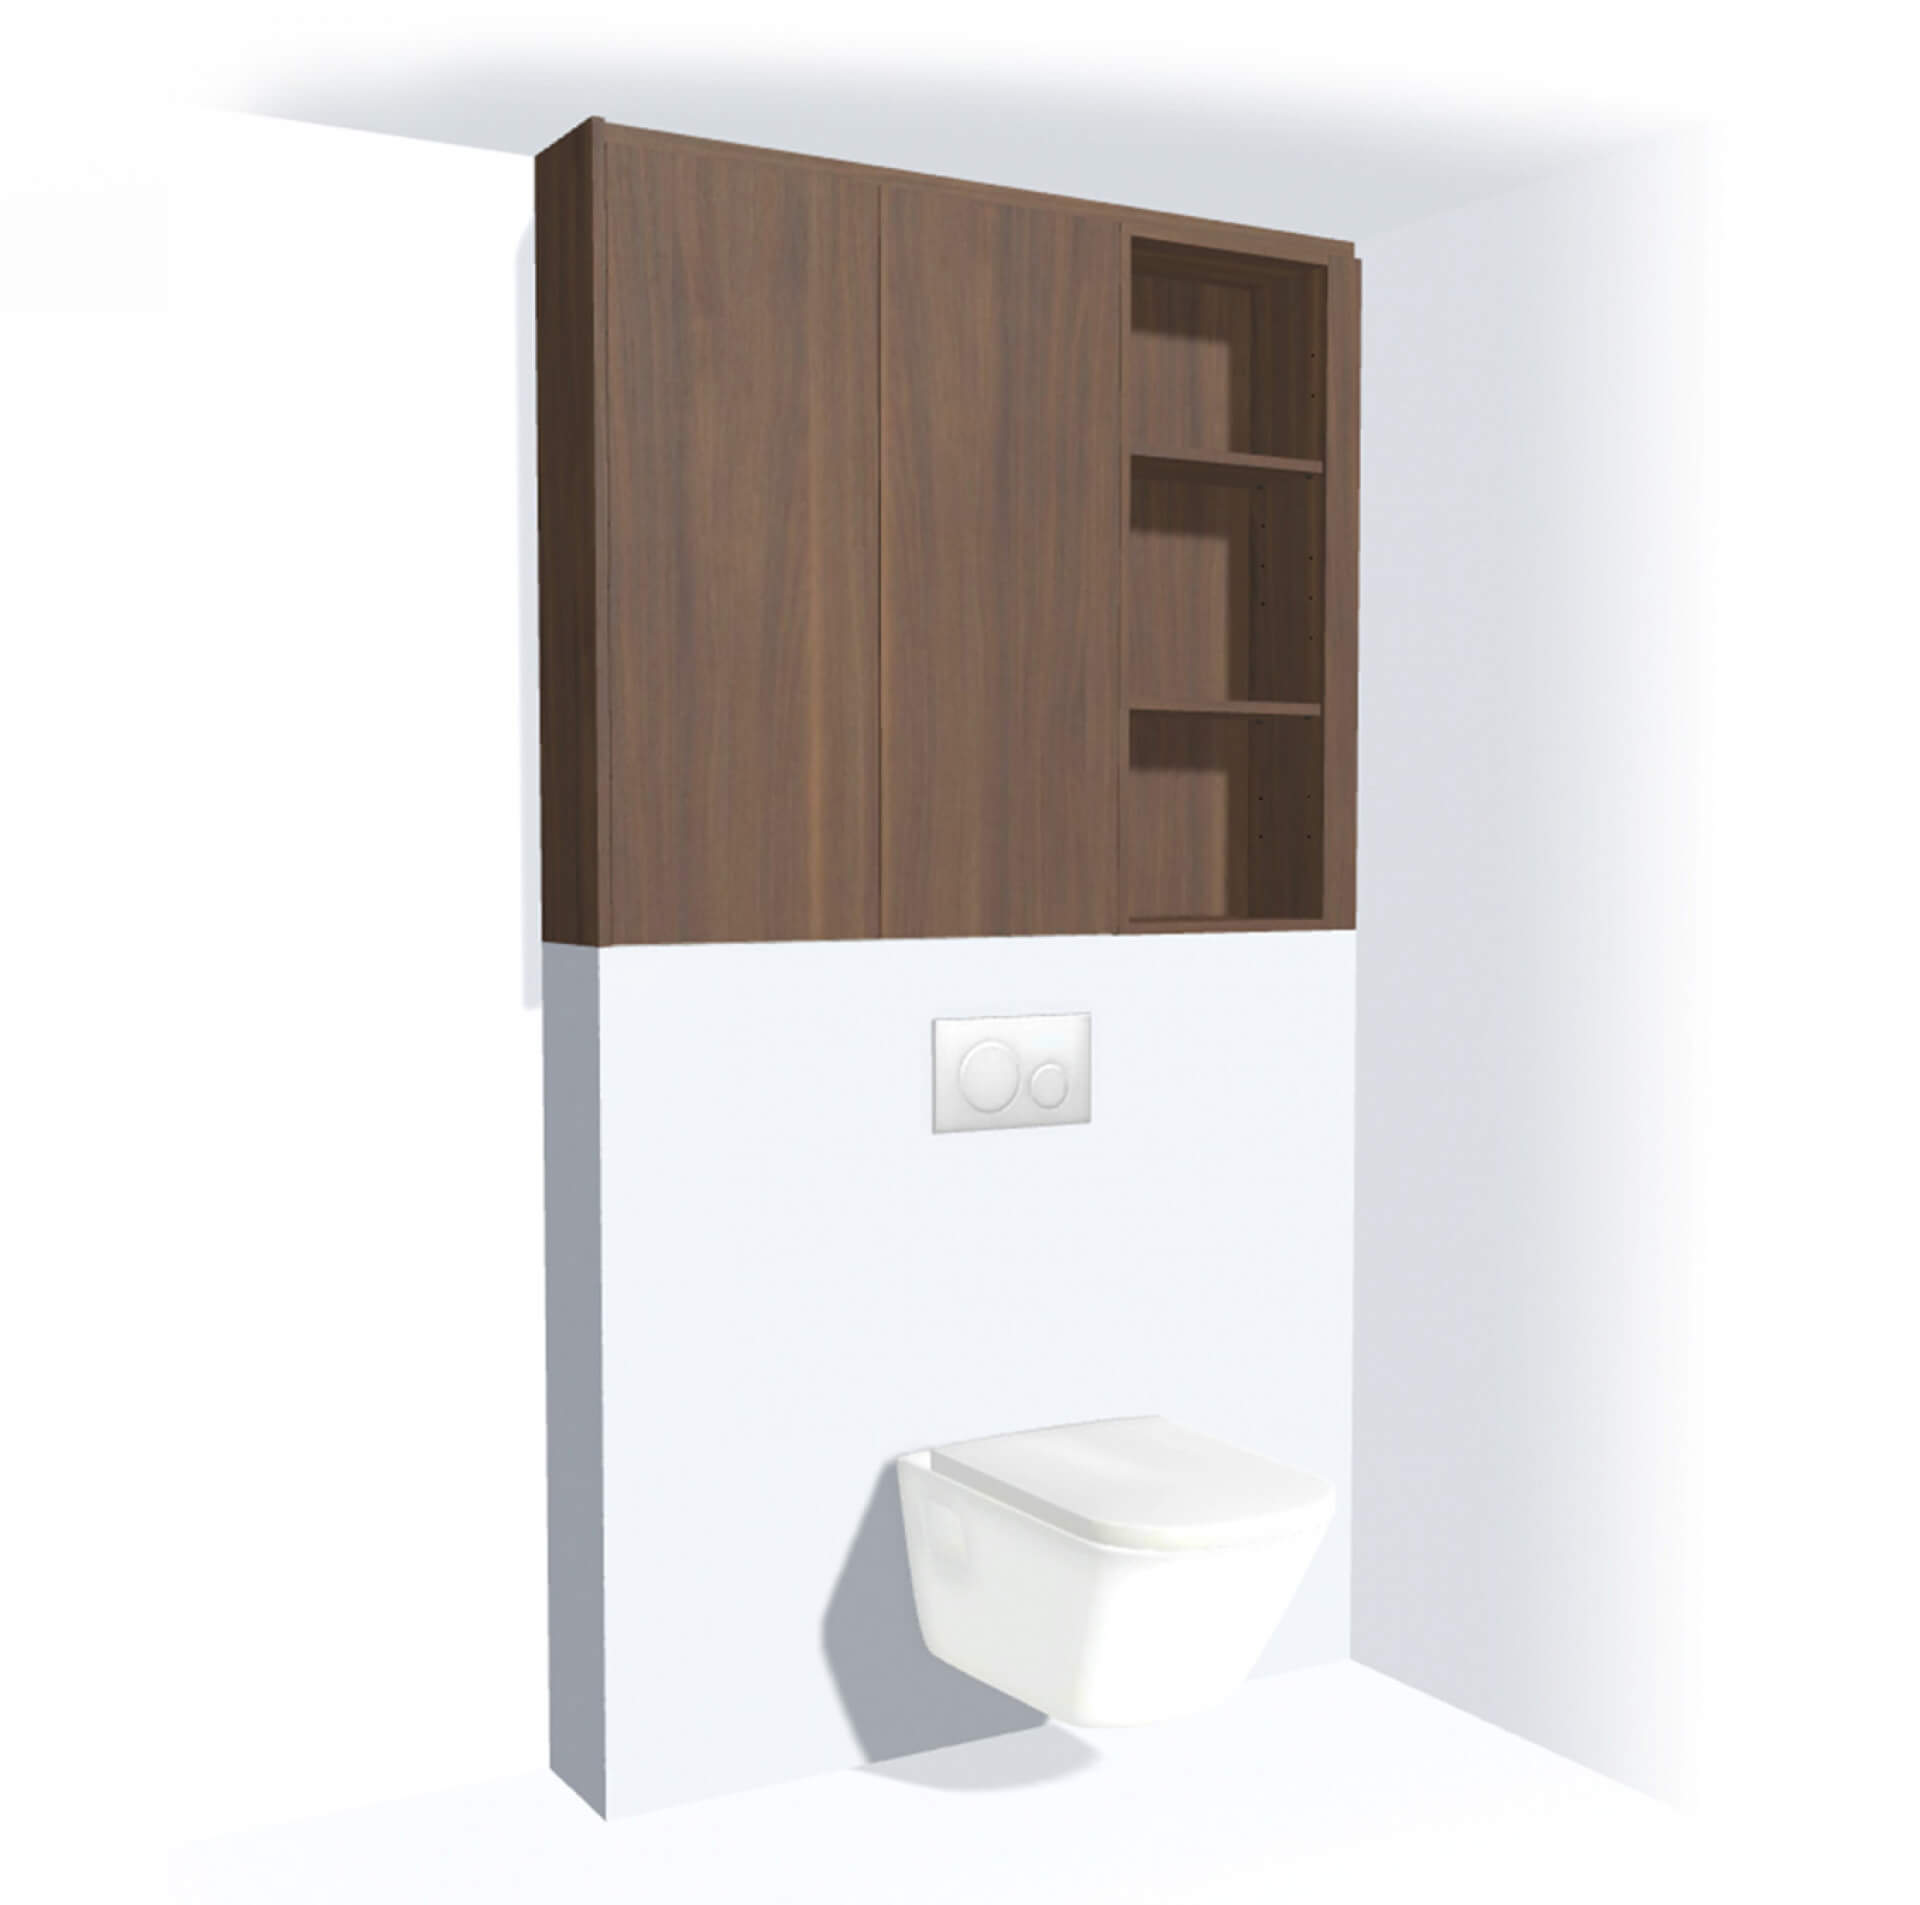  Custom storage cabinet above the toilet with a walnut wood look